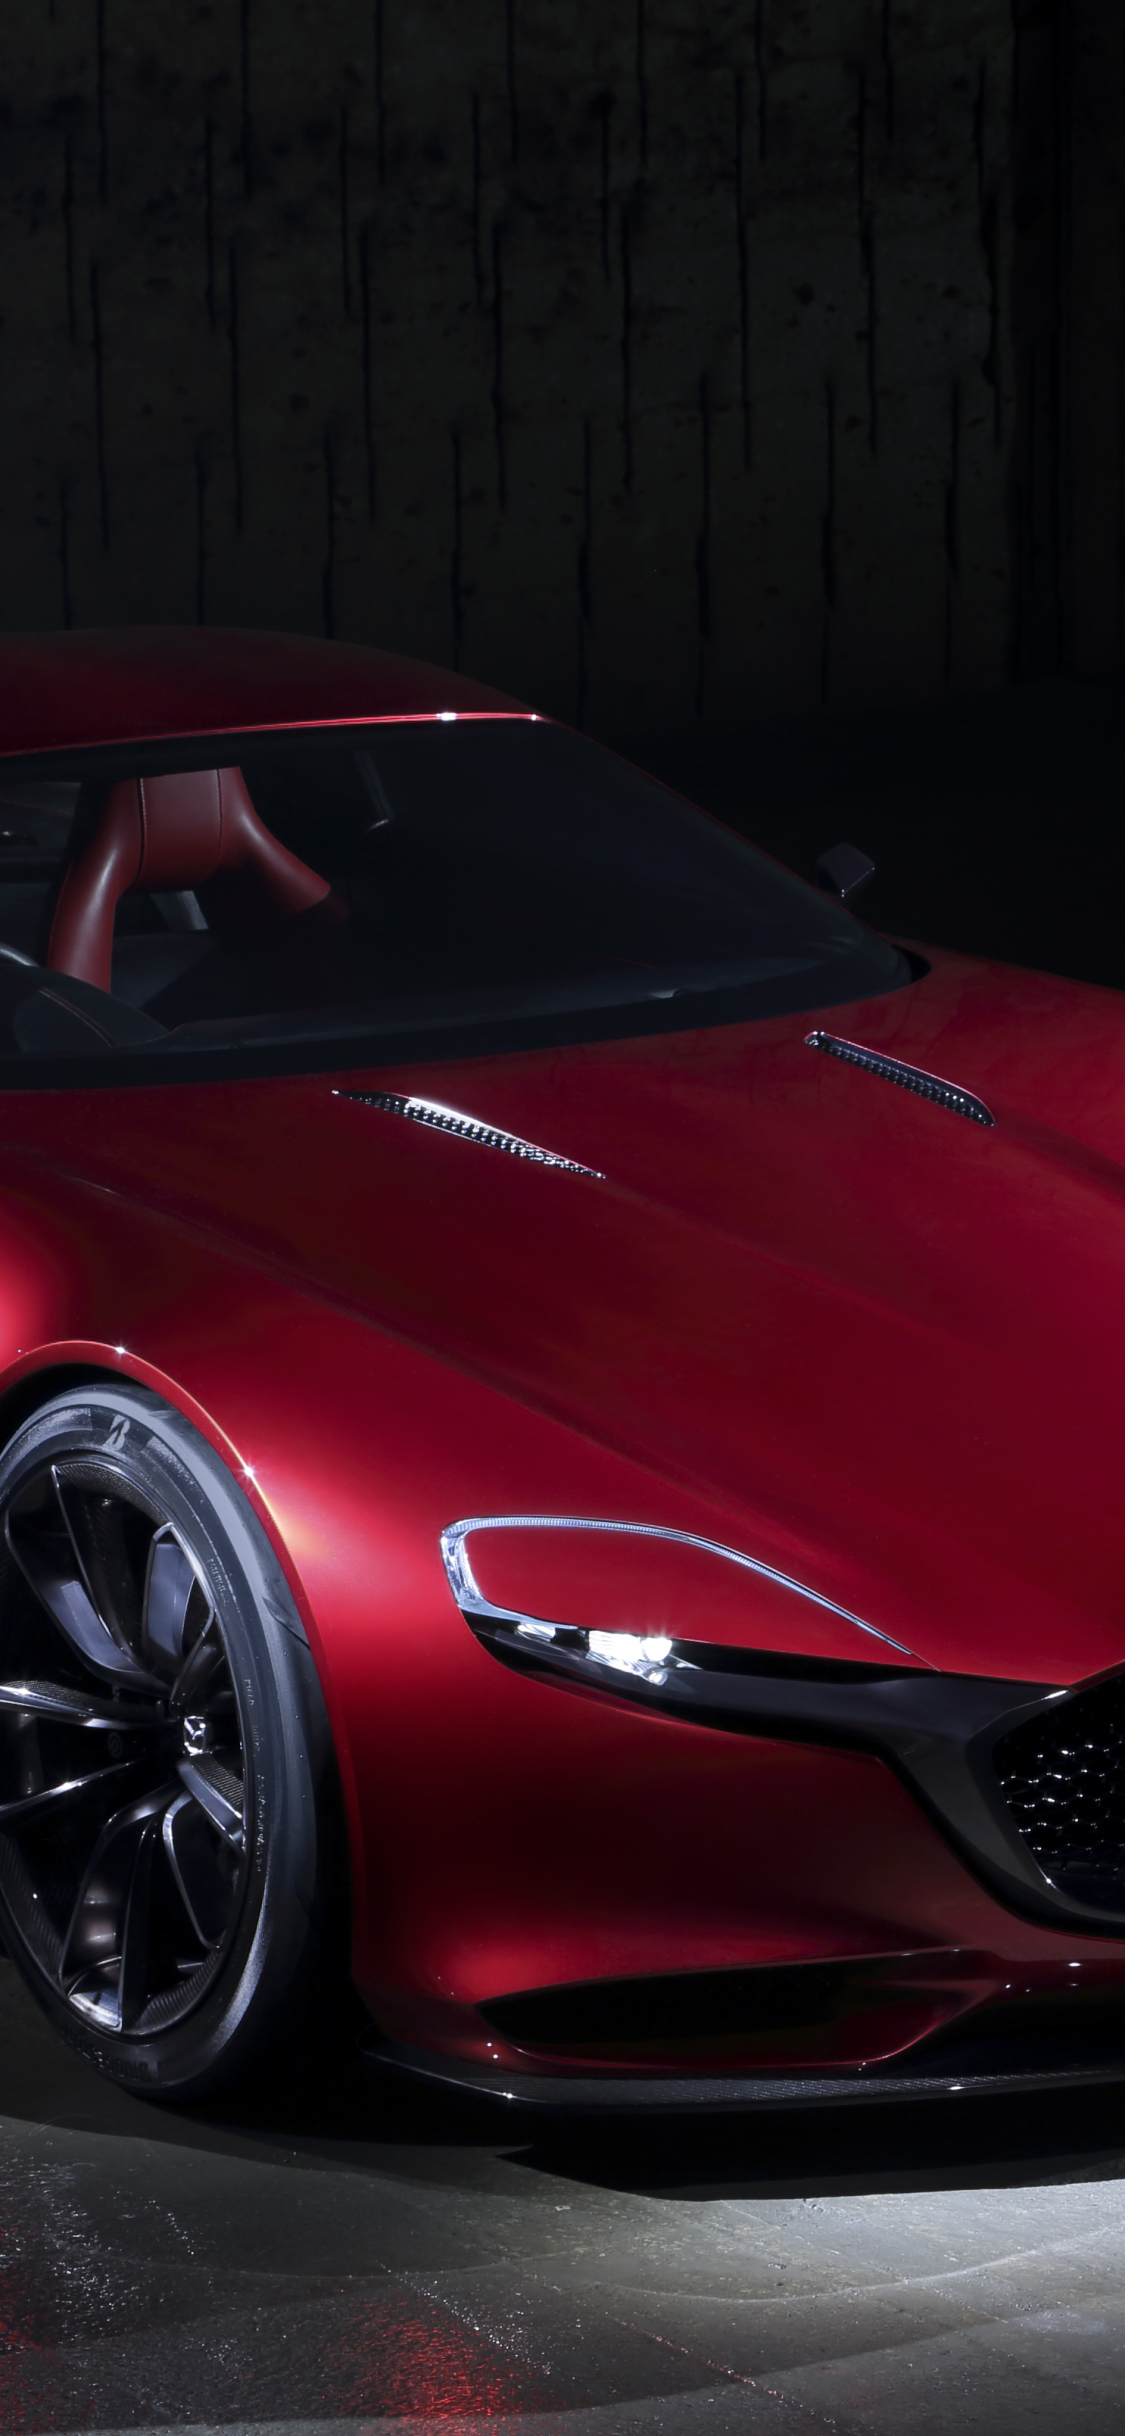 Download Red Mazda Rx Vision Concept Car 1125x2436 Wallpaper Iphone X 1125x2436 Hd Image Background